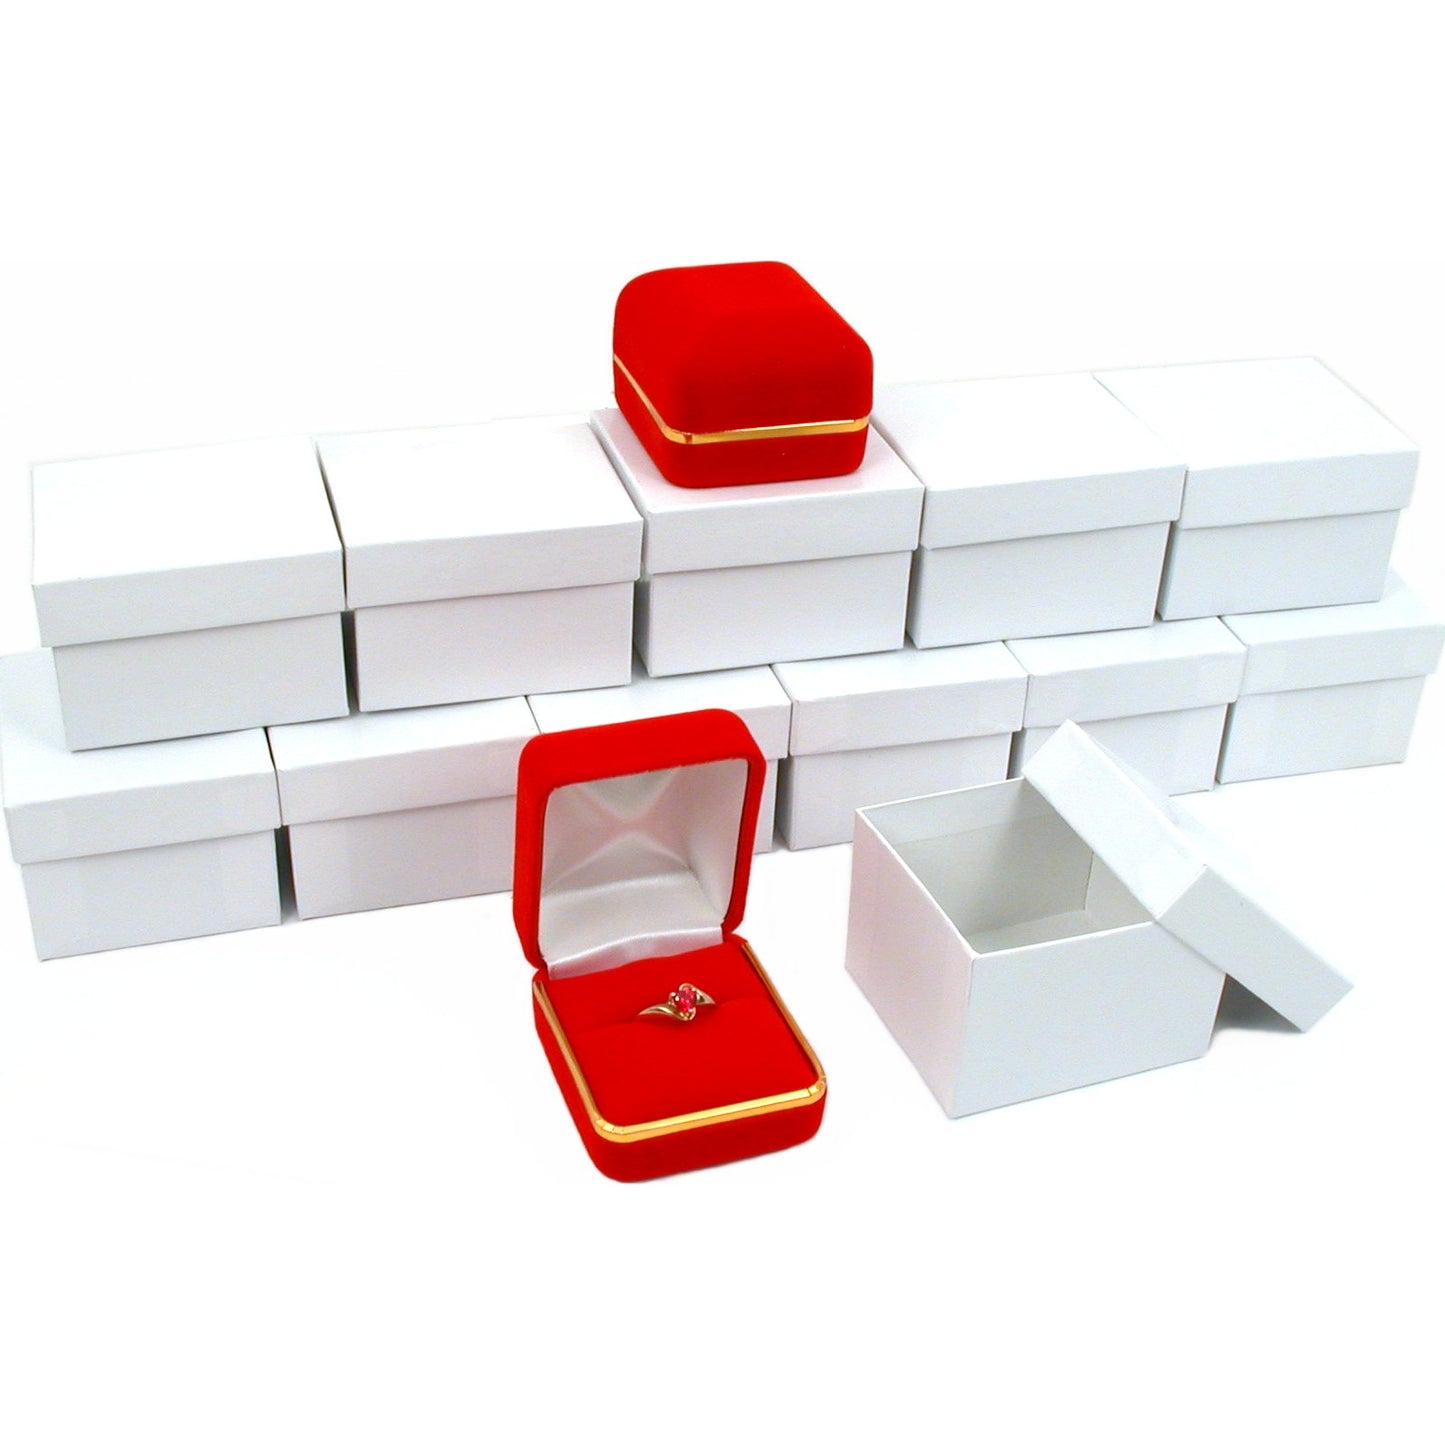 12 Red Velvet Ring Gift Boxes Jewelry Showcase Display